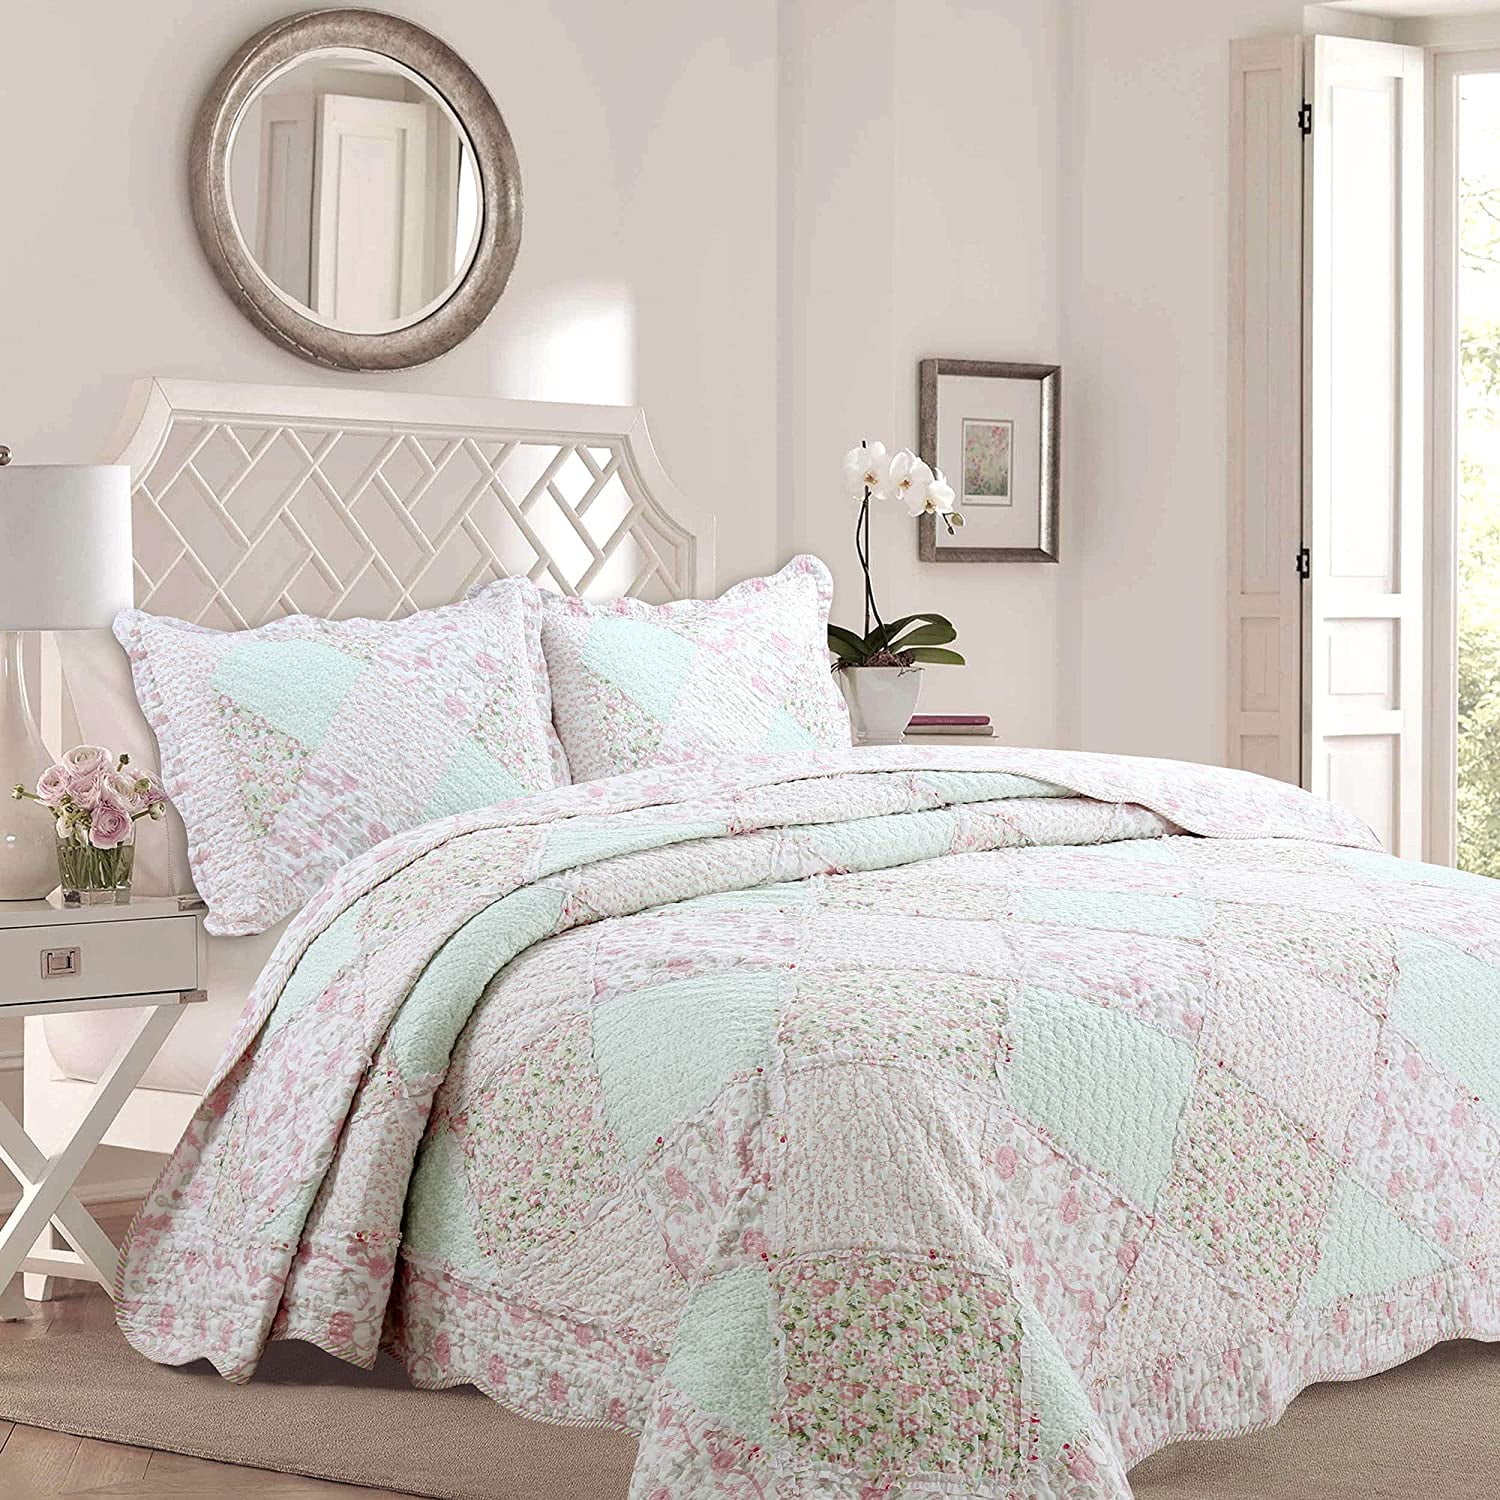 Cozy Line Home Fashions Pink Embroidered Elephant Tales 100% Cotton Reversible Quilt Bedding Set Coverlet Twin - 2 Piece: 1 Quilt + 1 Standard Sham Bedspreads 